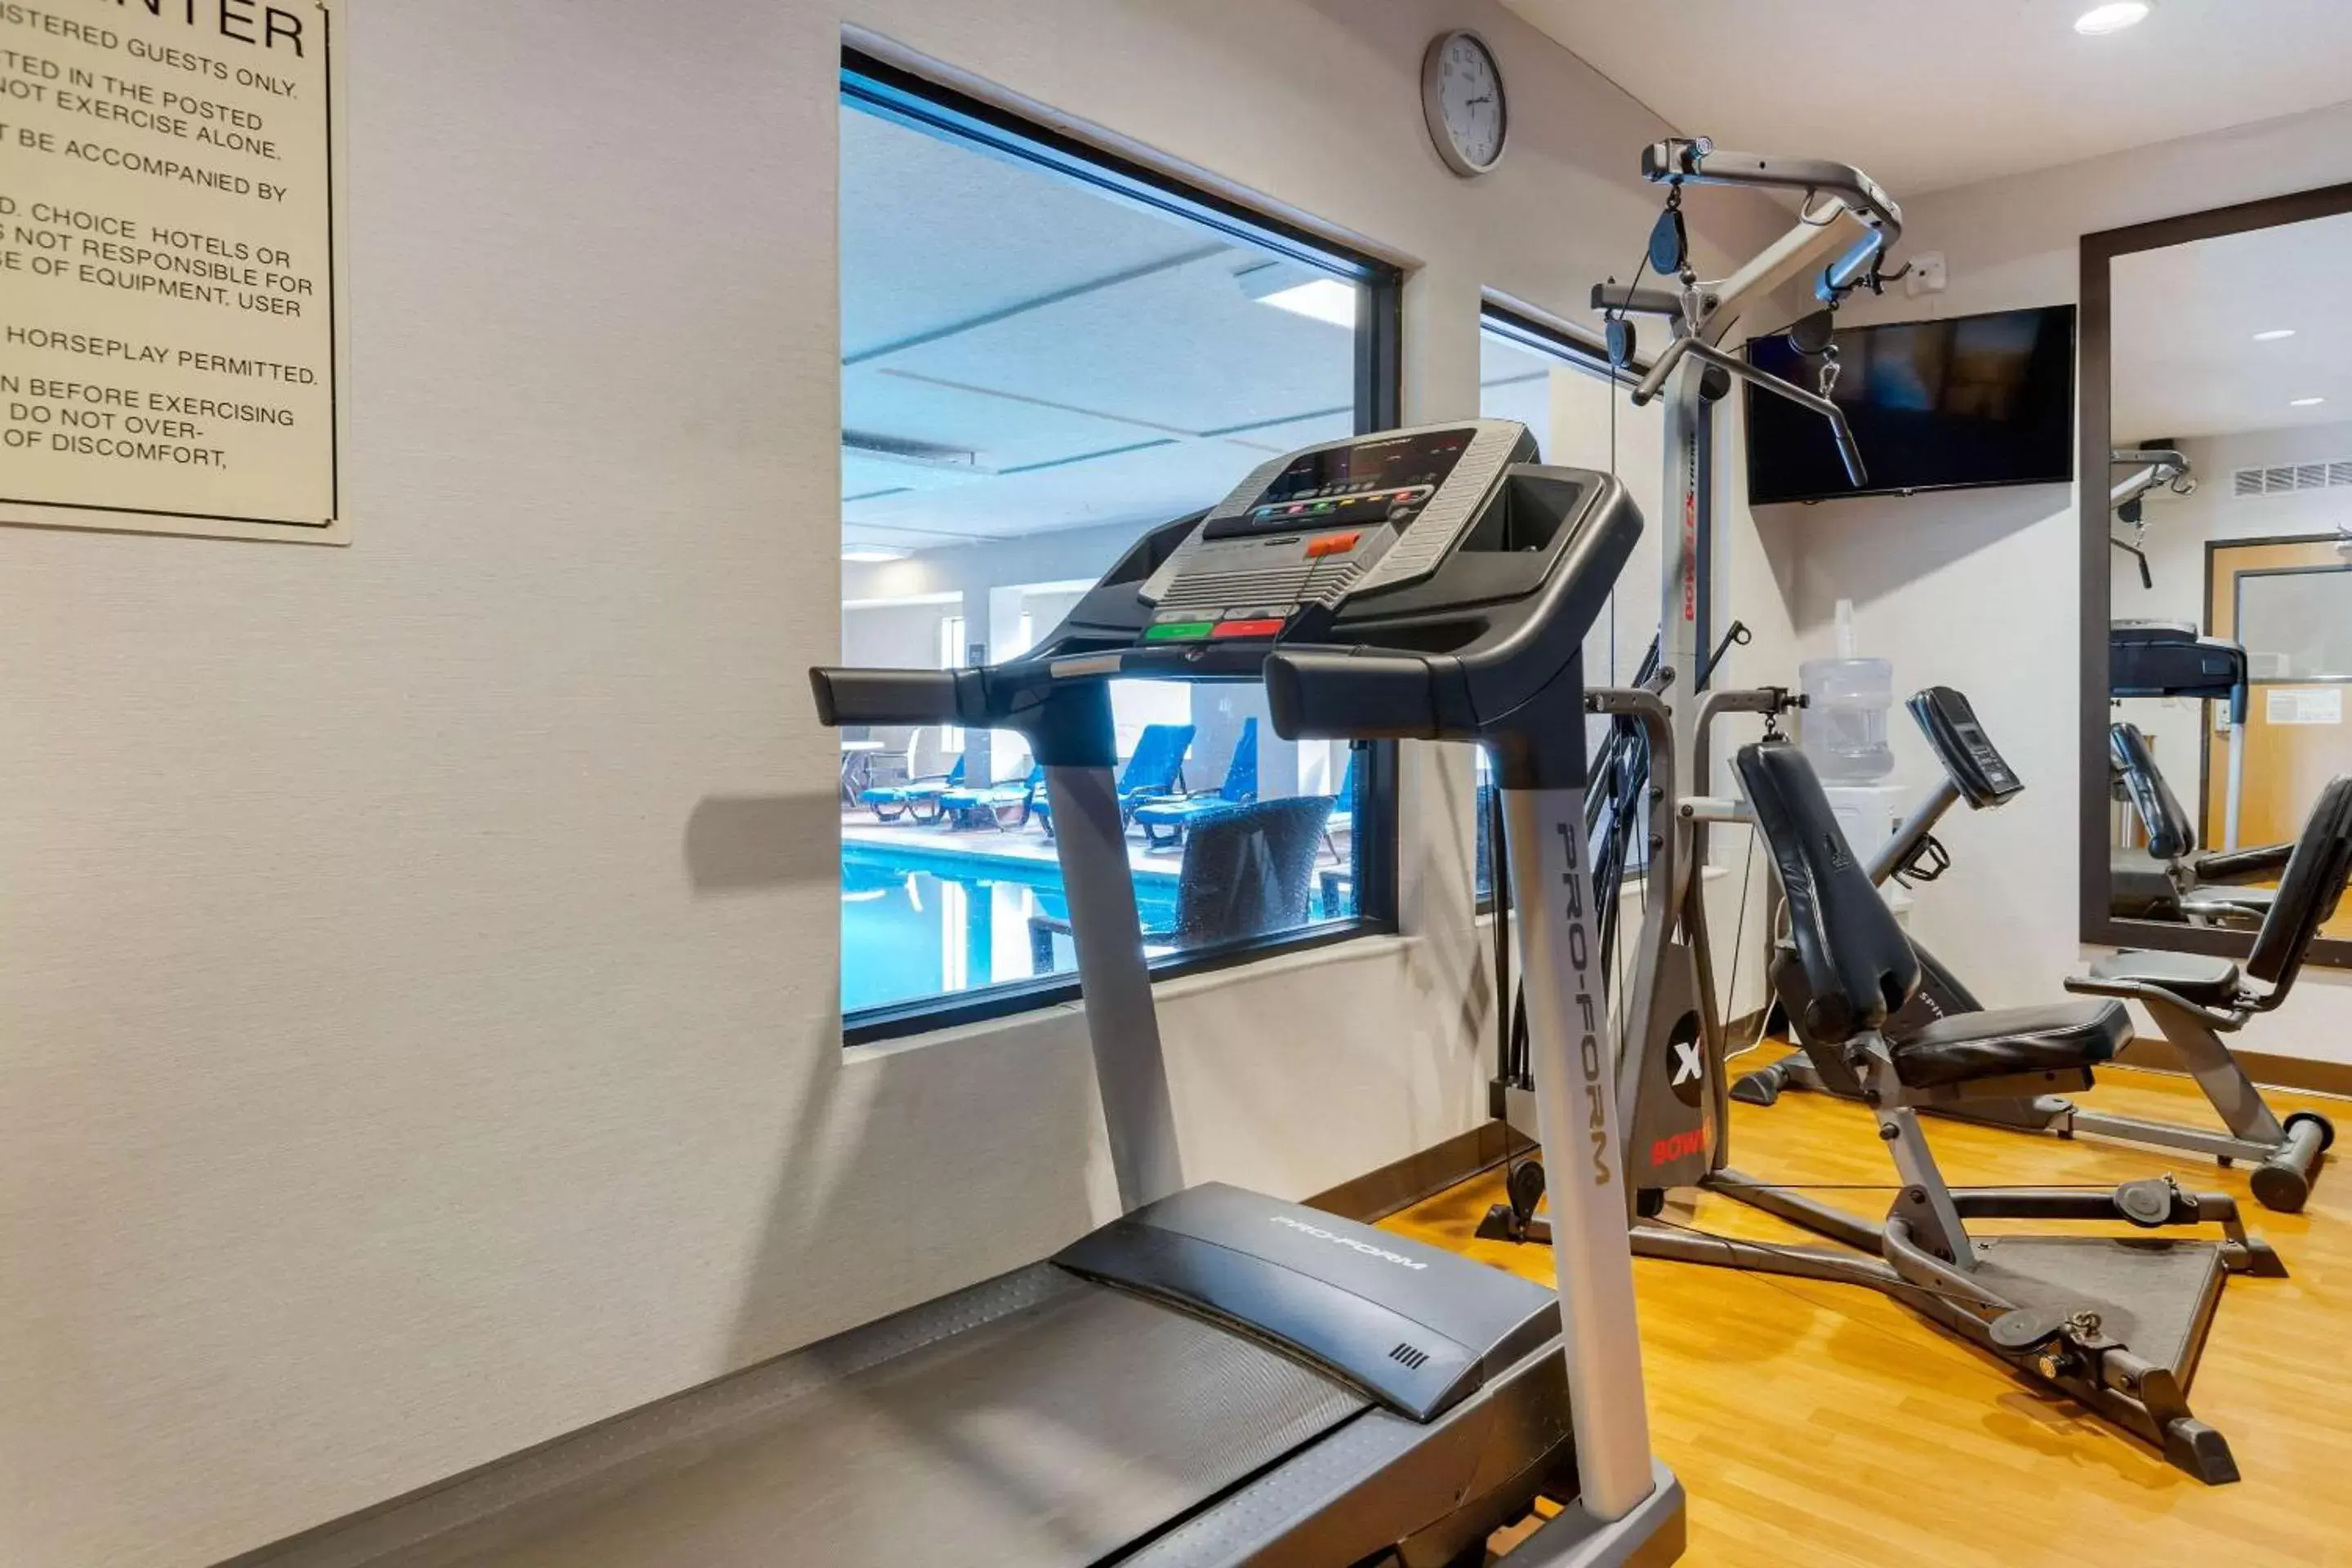 Fitness centre/facilities, Fitness Center/Facilities in Comfort Suites South Haven near I-96